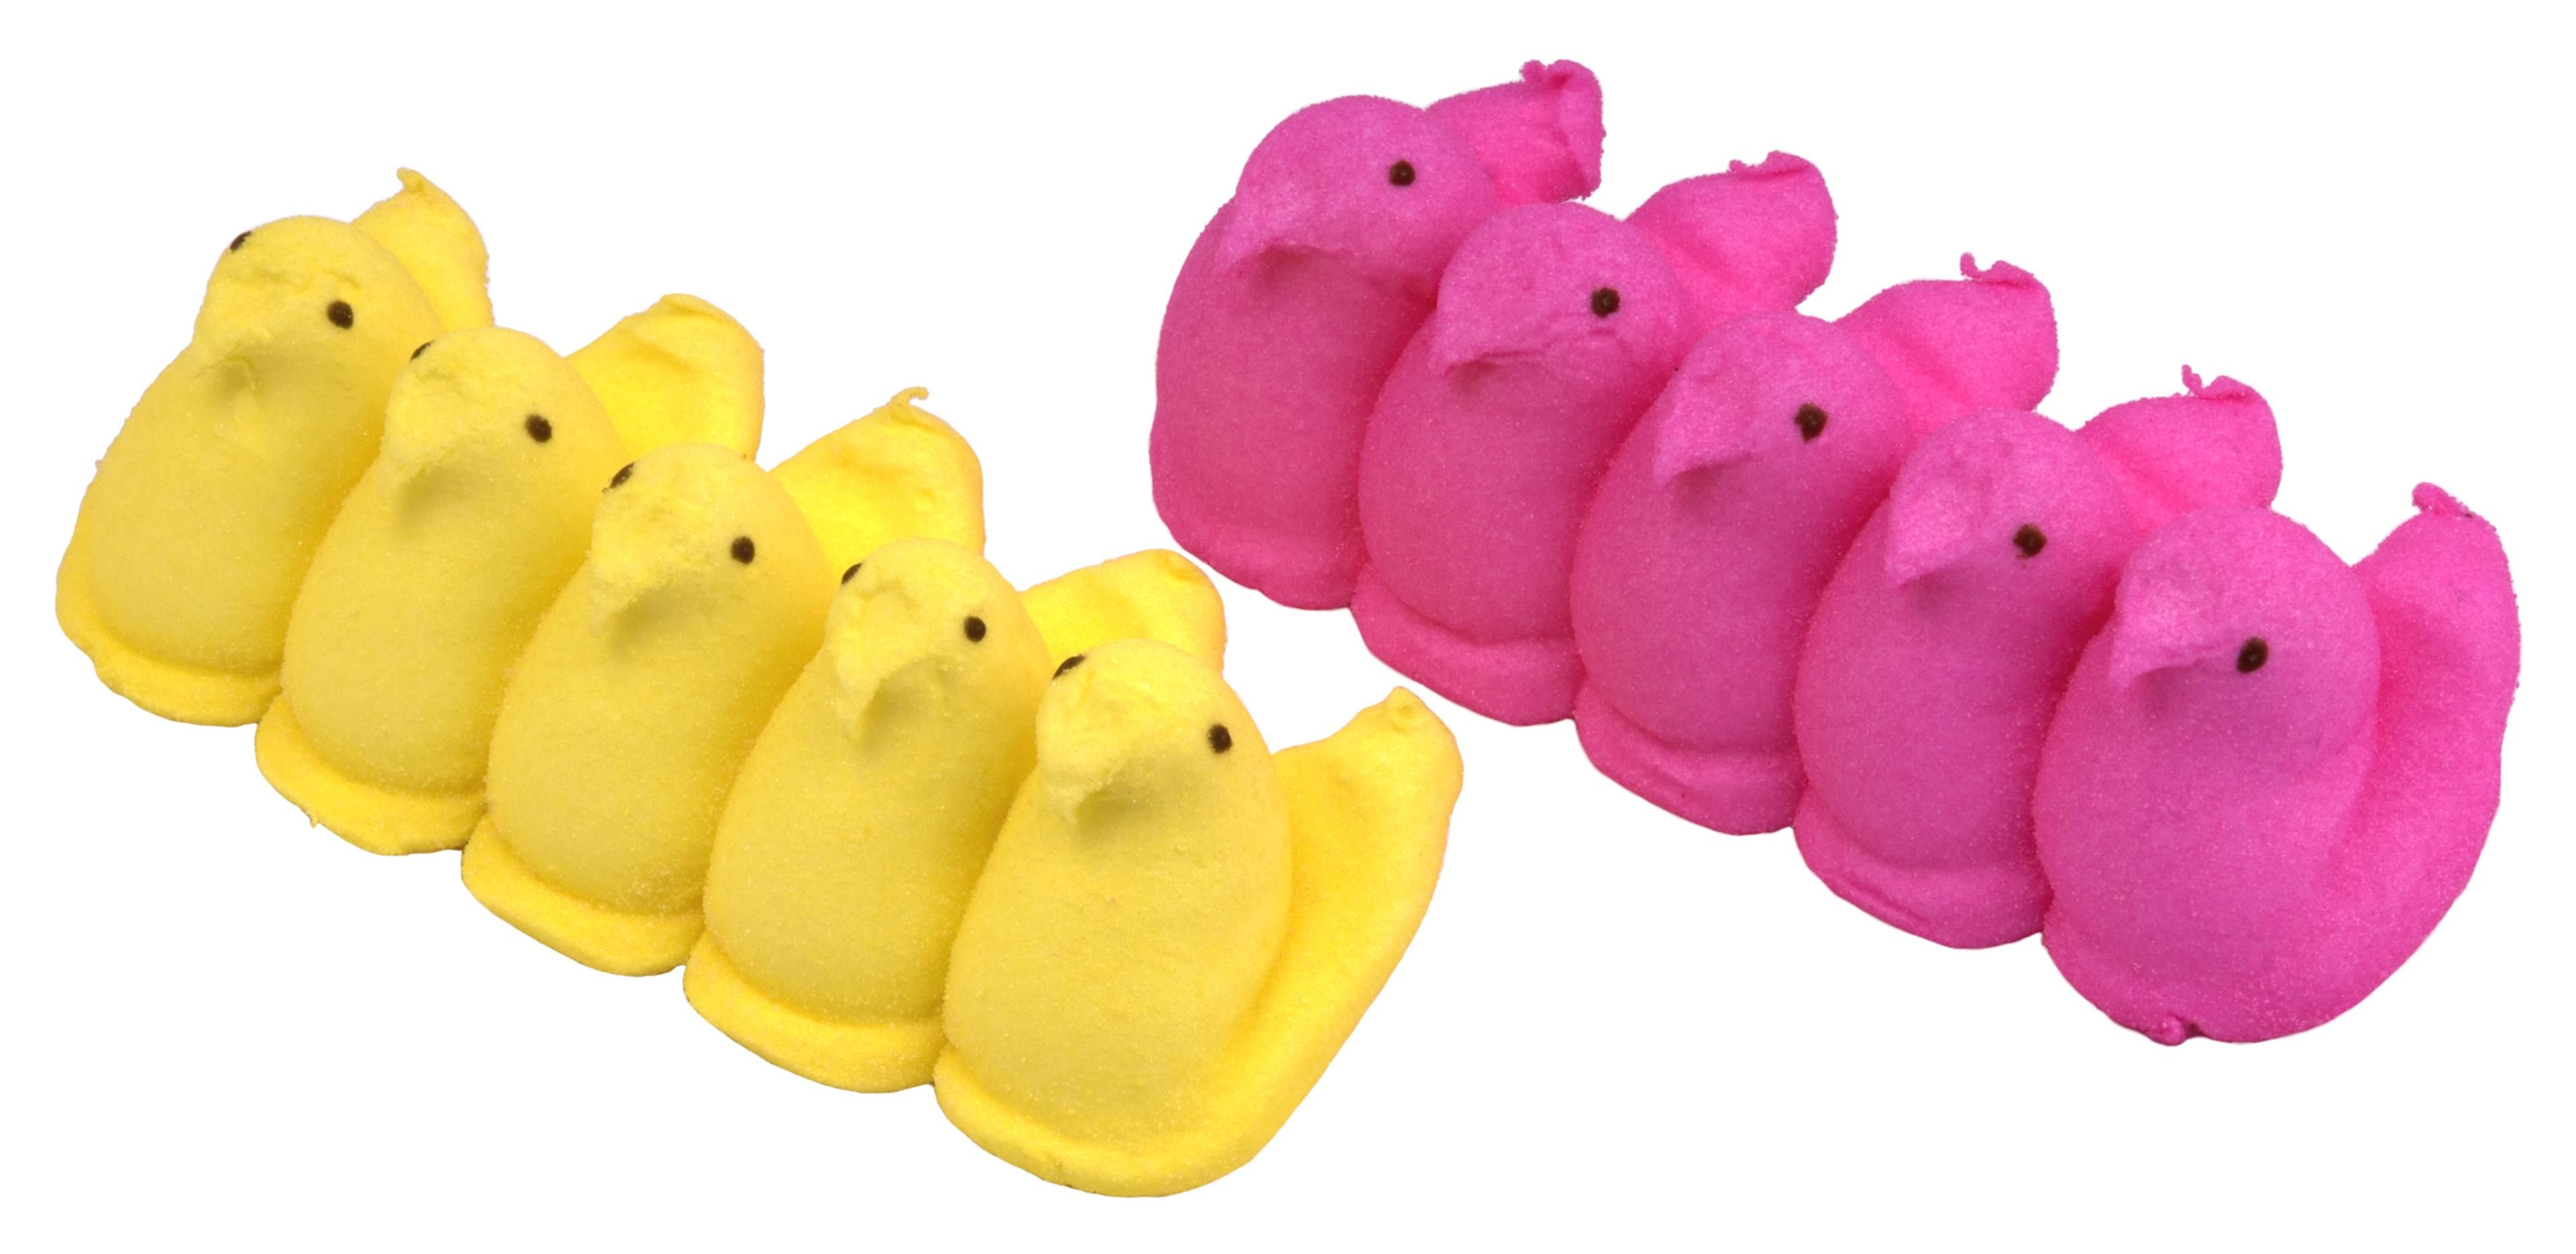 The wait is over: Peeps will be back in time for Easter